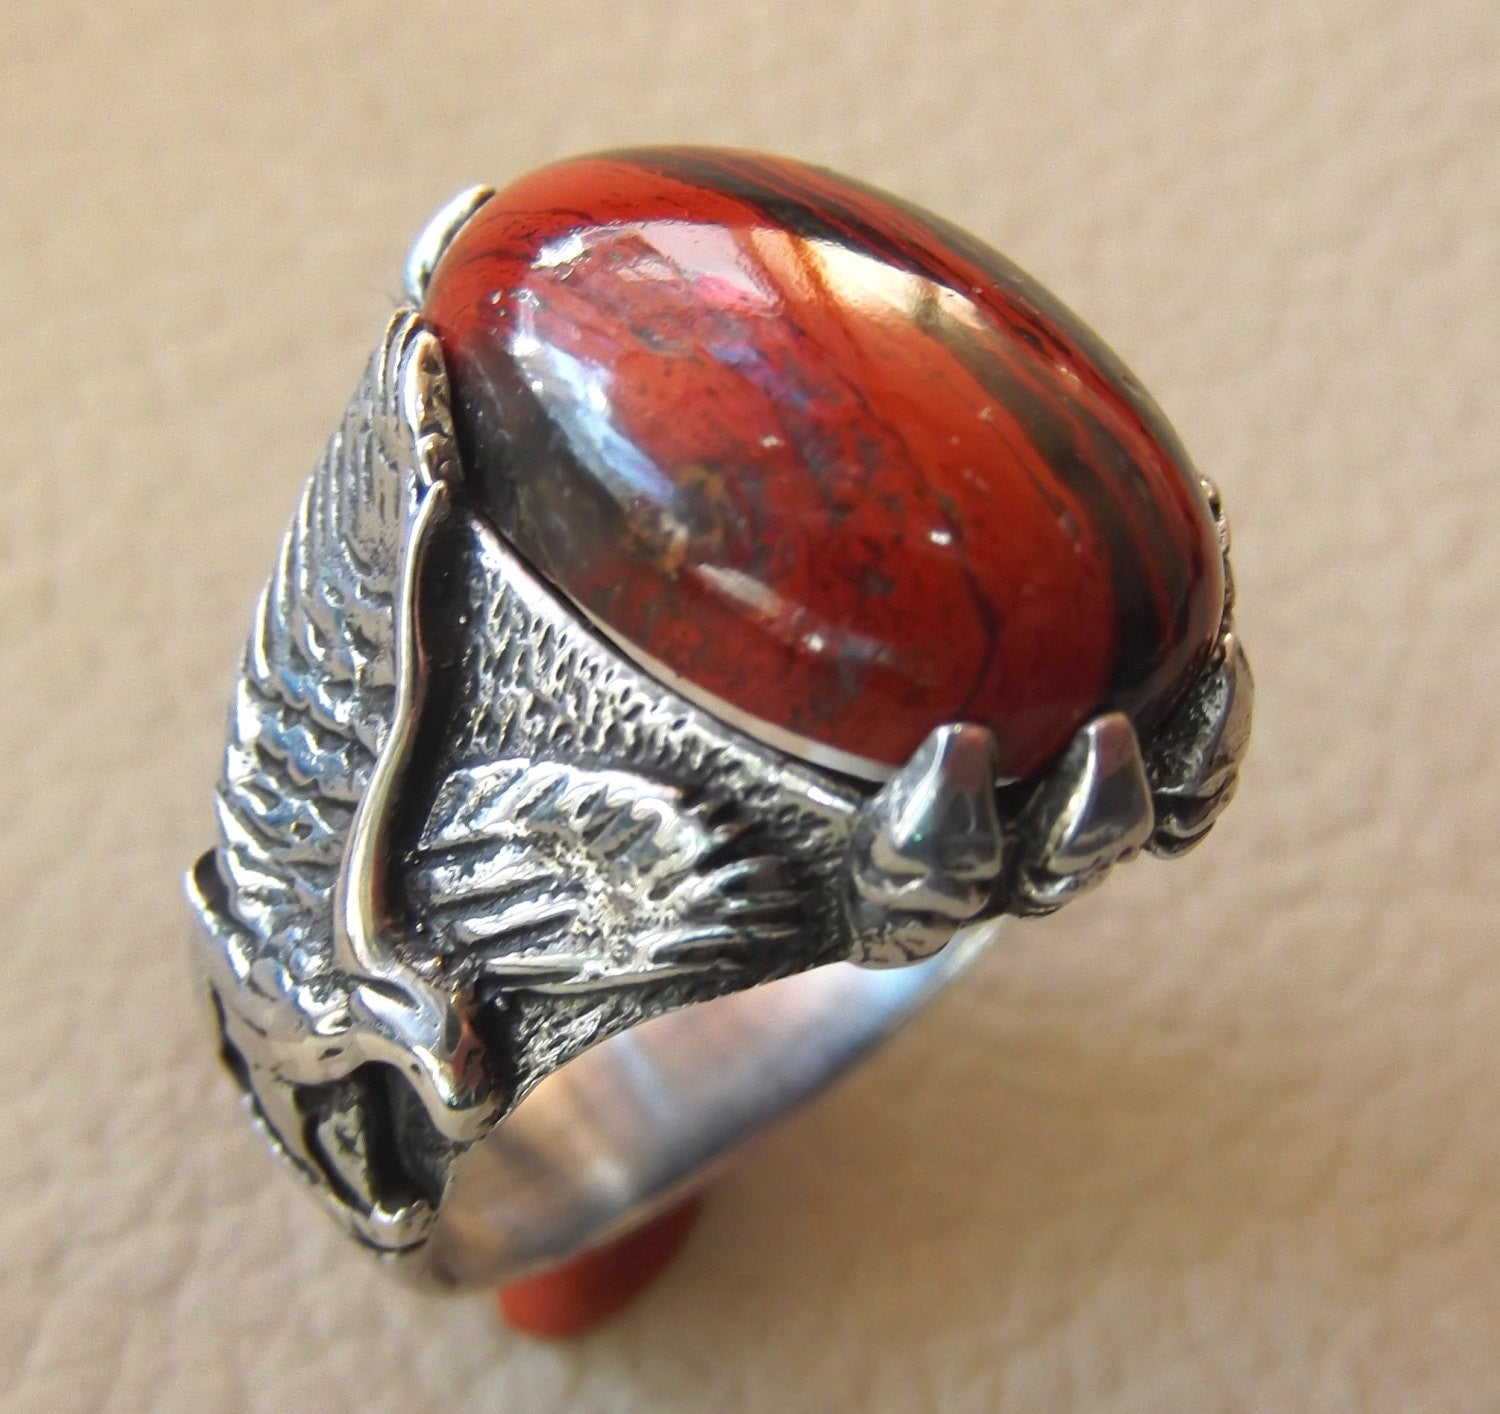 snake skin jasper stone natural gem sterling silver 925 ring red and black oval semi precious cabochon man eagle ring jewelry fast shipping